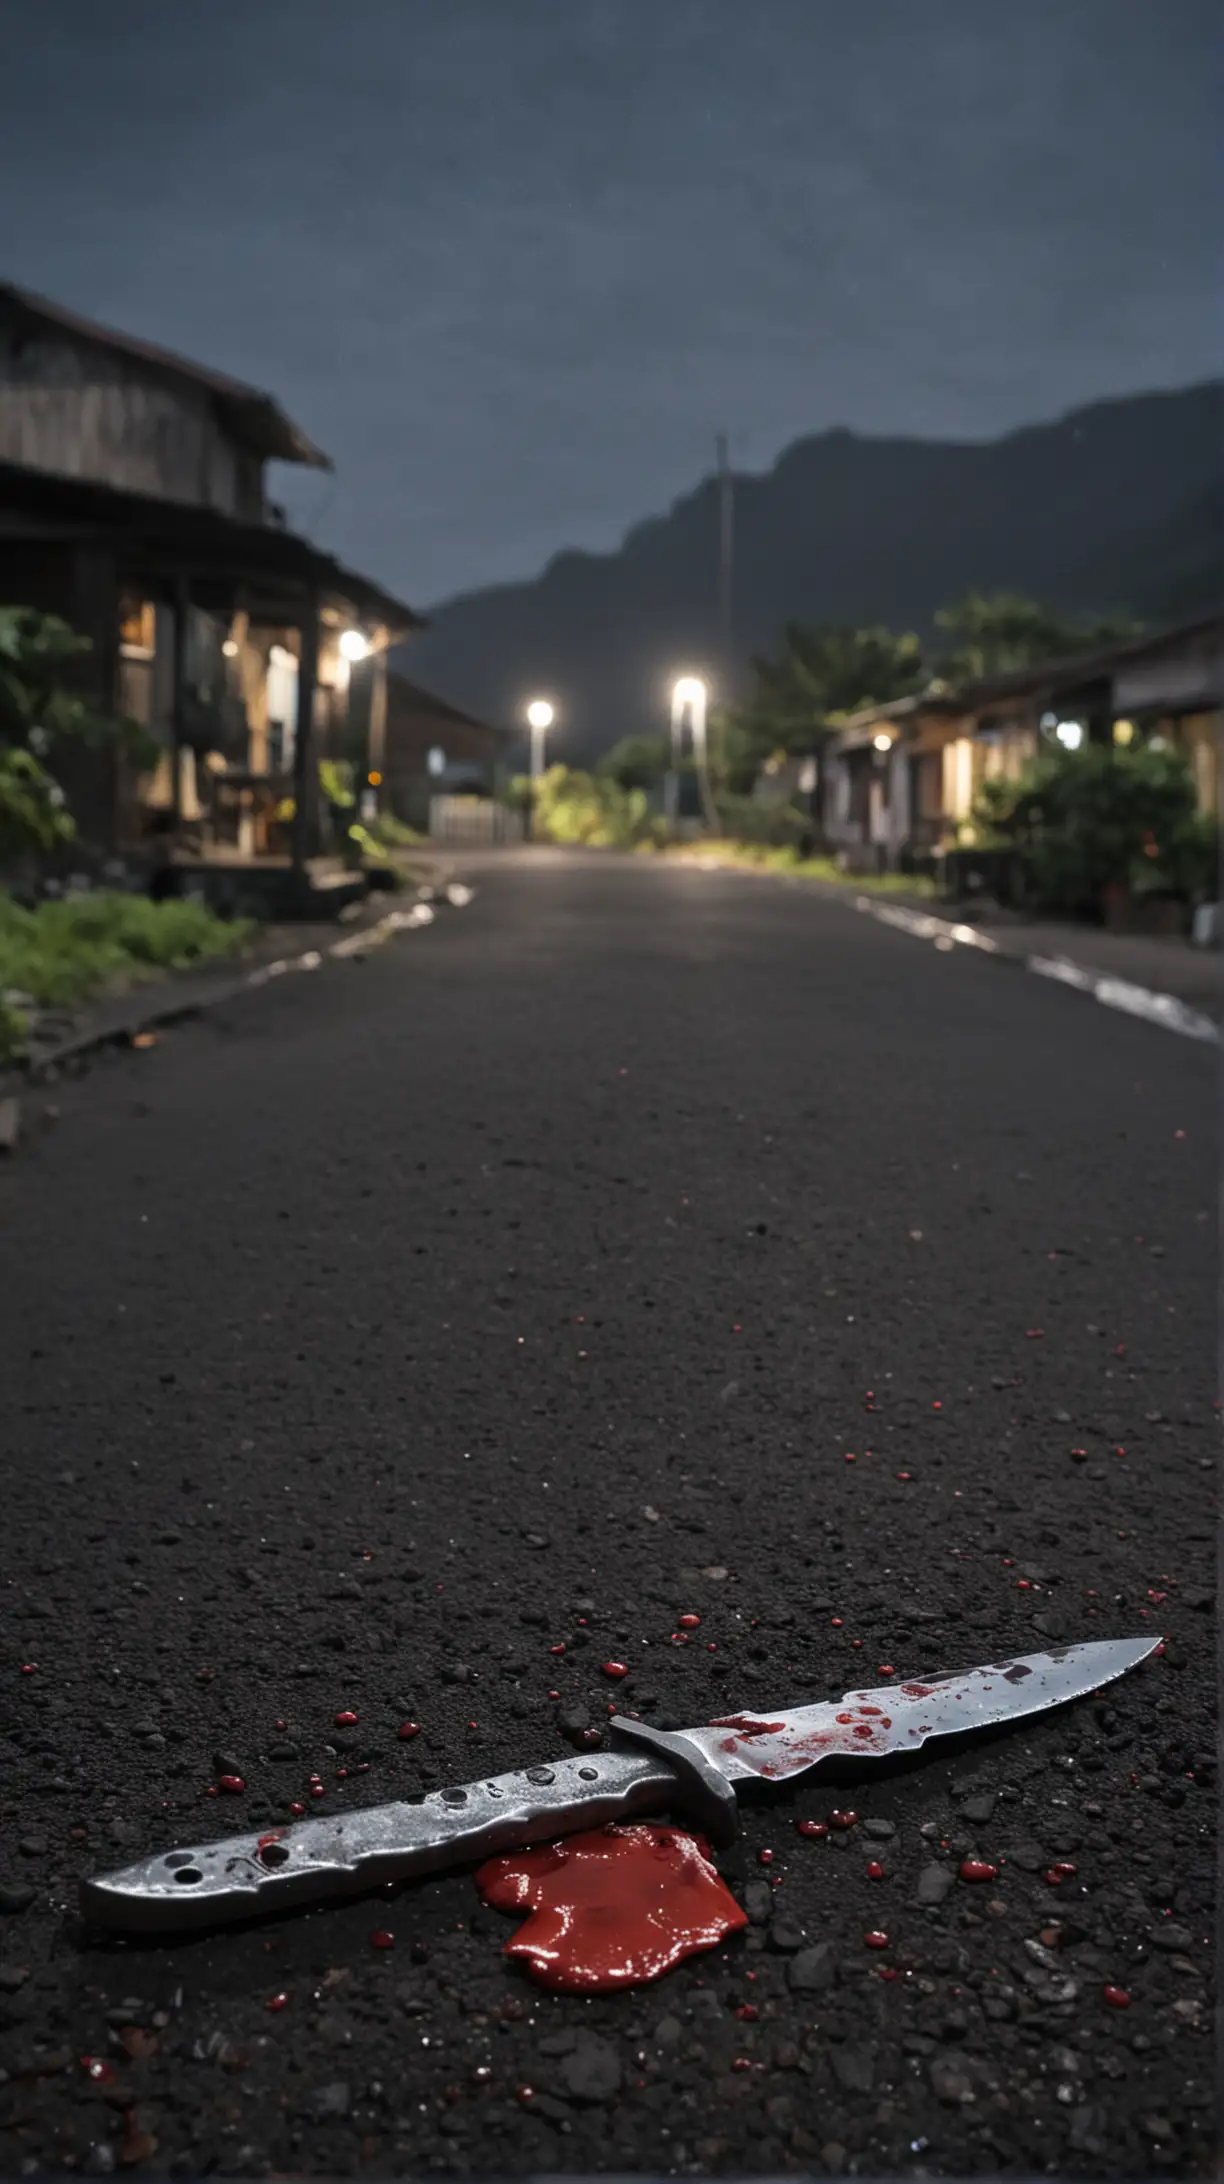 Gloomy Night in Runion Island Foreboding Village with Bloodied Knife